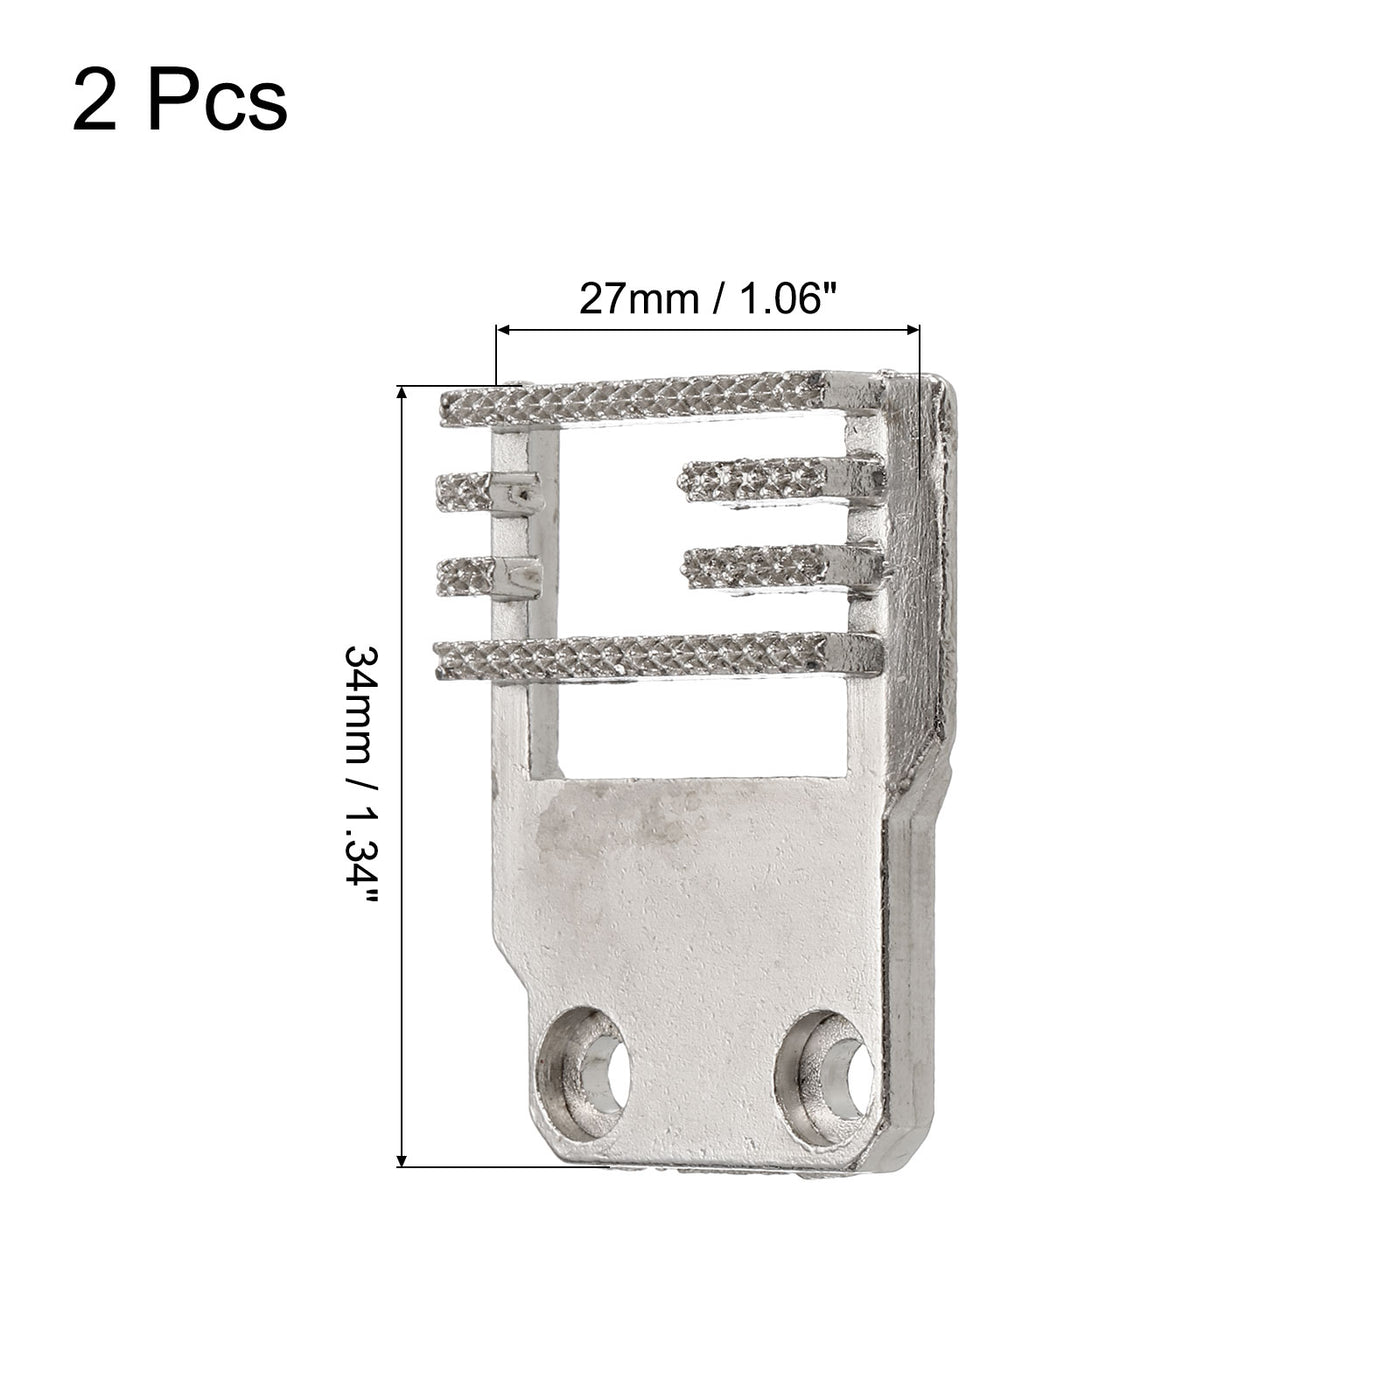 uxcell Uxcell Sewing Machine Feed Dog Galvanized Iron for Most Universal Sewing Machine, 2Pcs